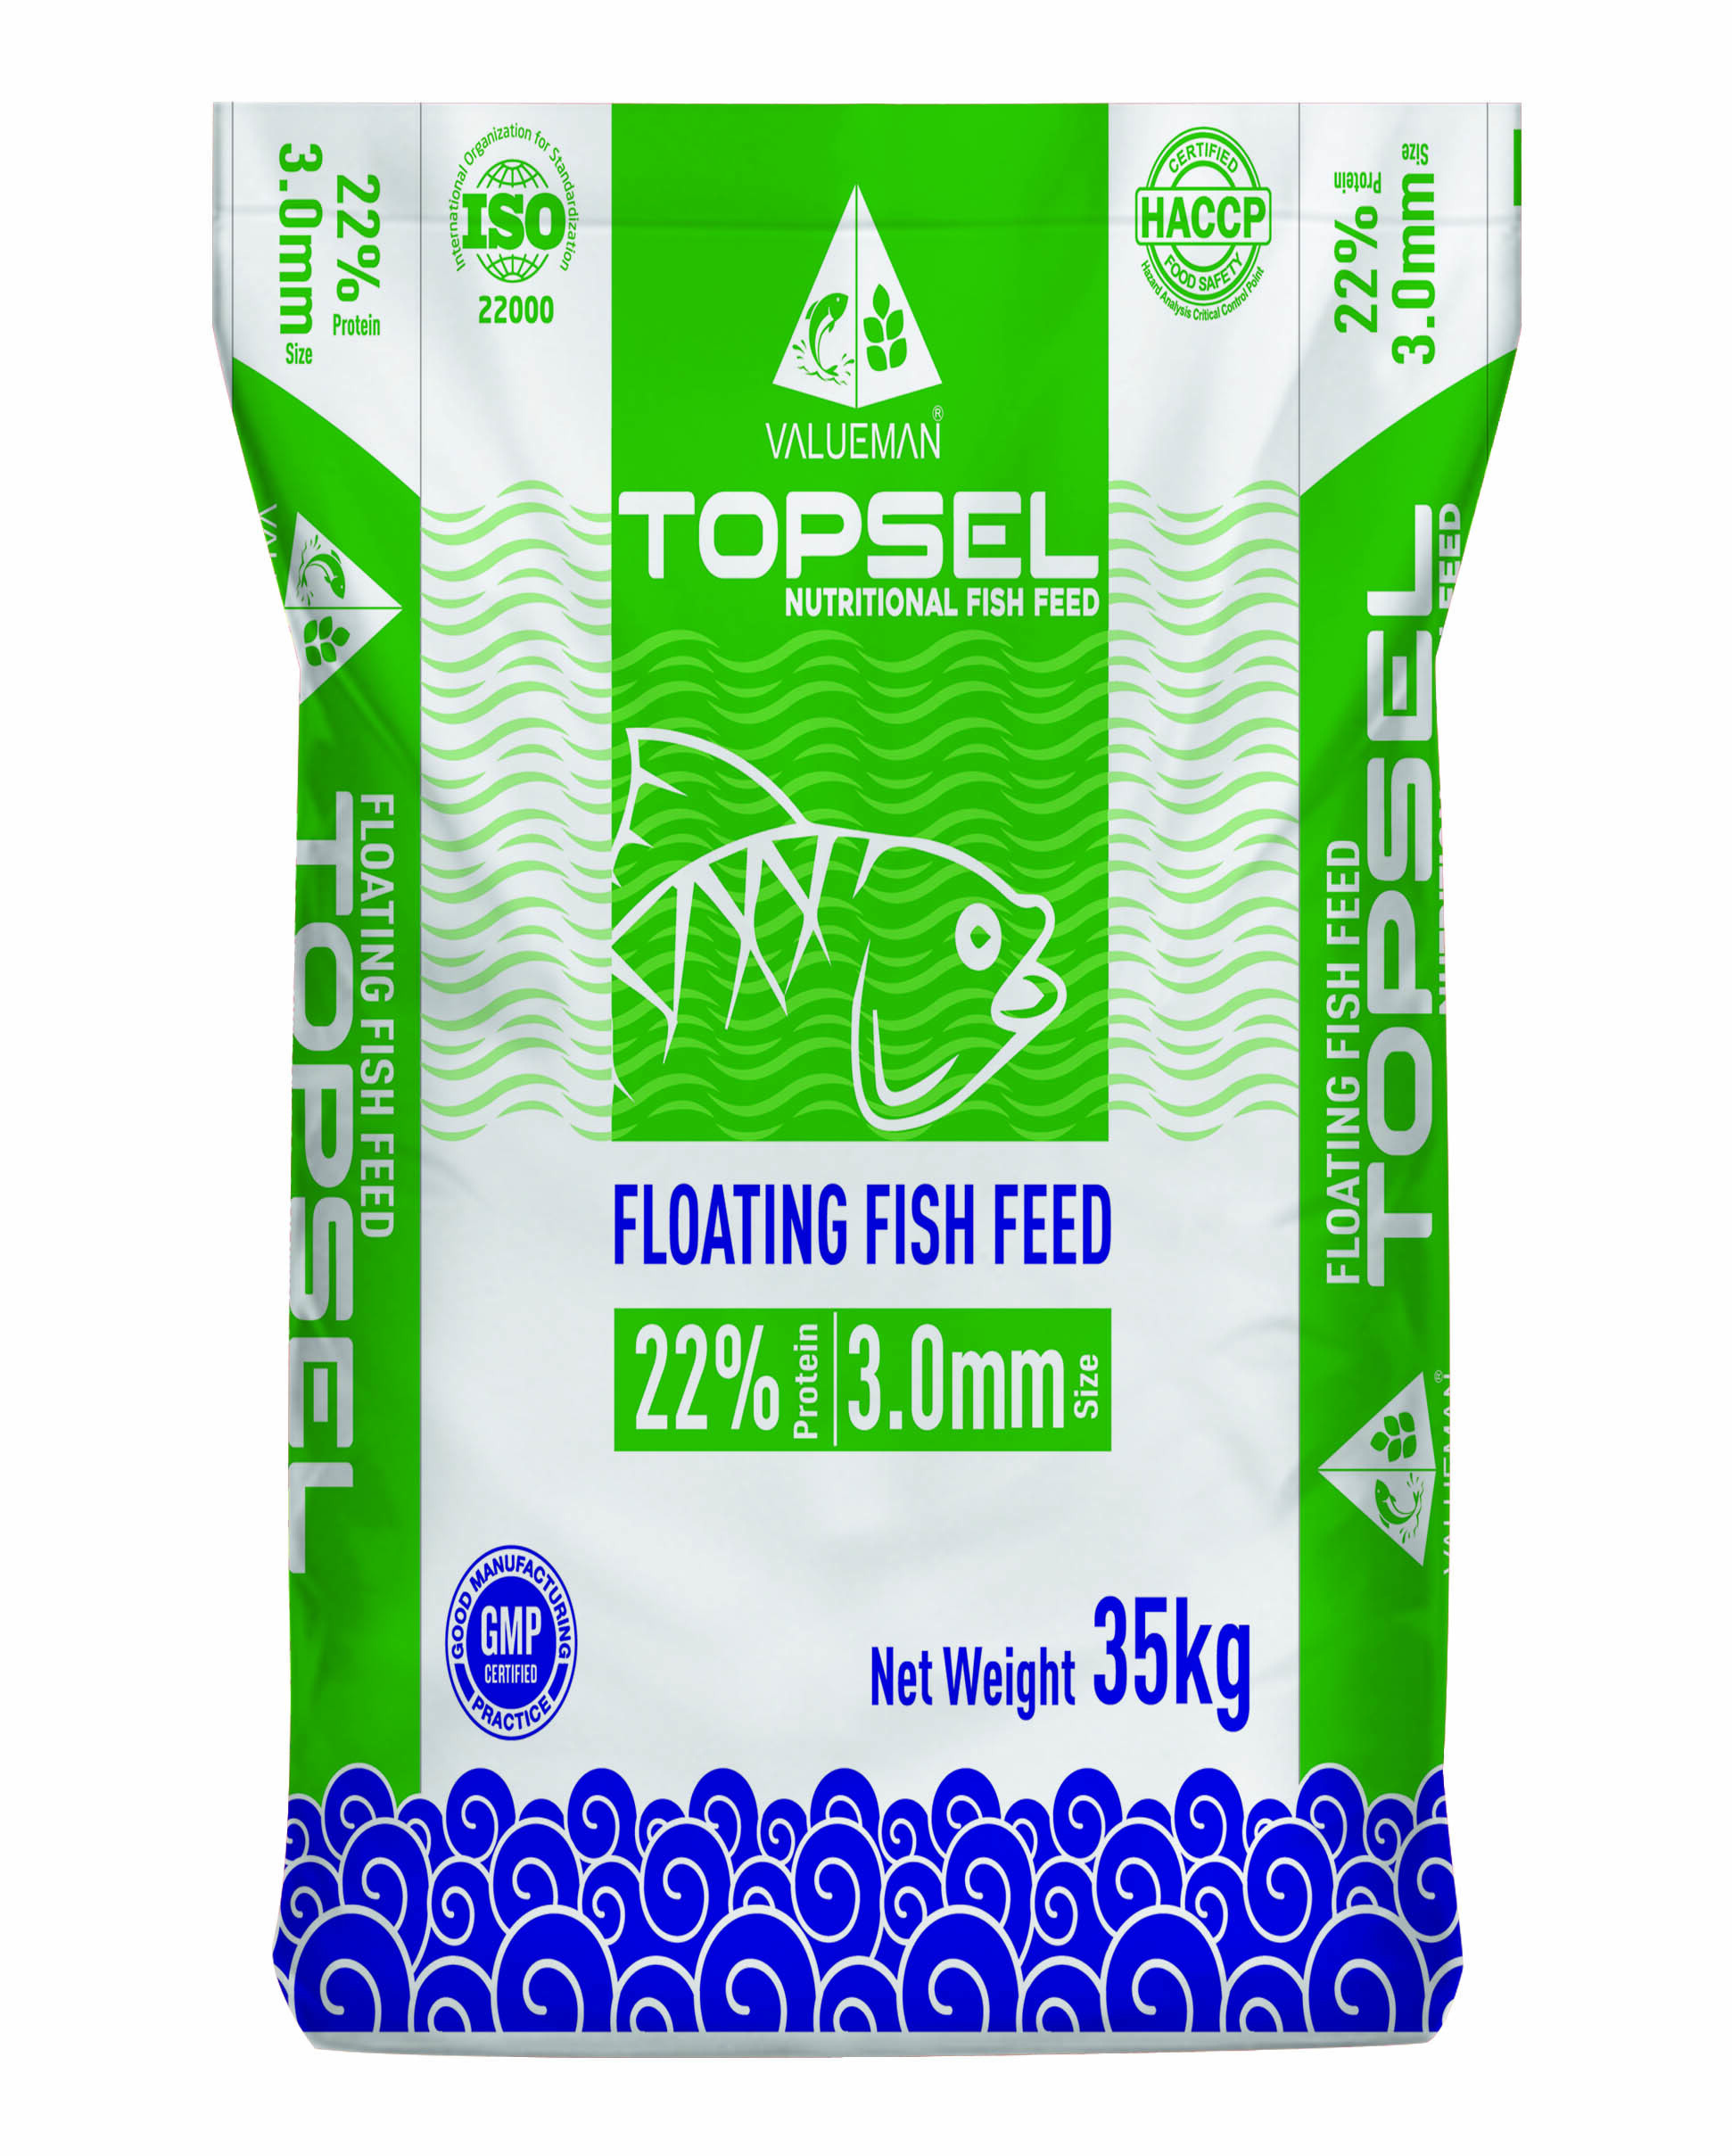 Topgro Sinking Fish Feed Size (1.8 - 2.5/2.8) 22P/4F to 28P/4F